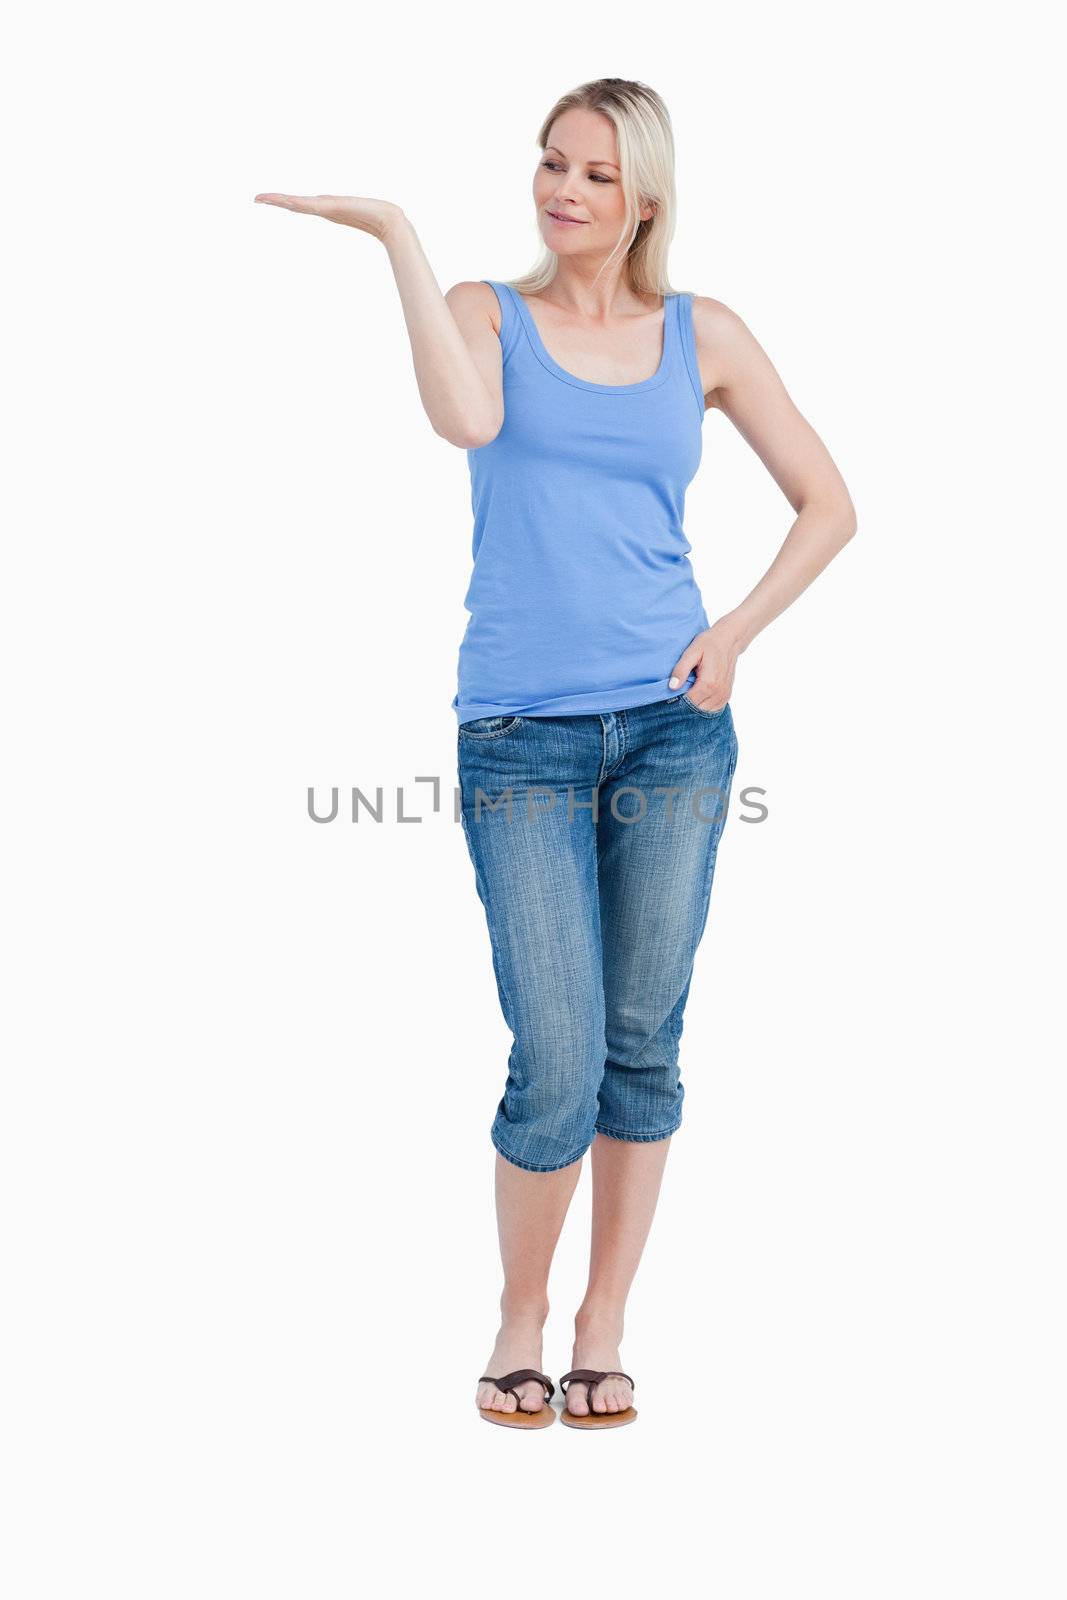 Blonde woman looking at her right hand palm up against a white background